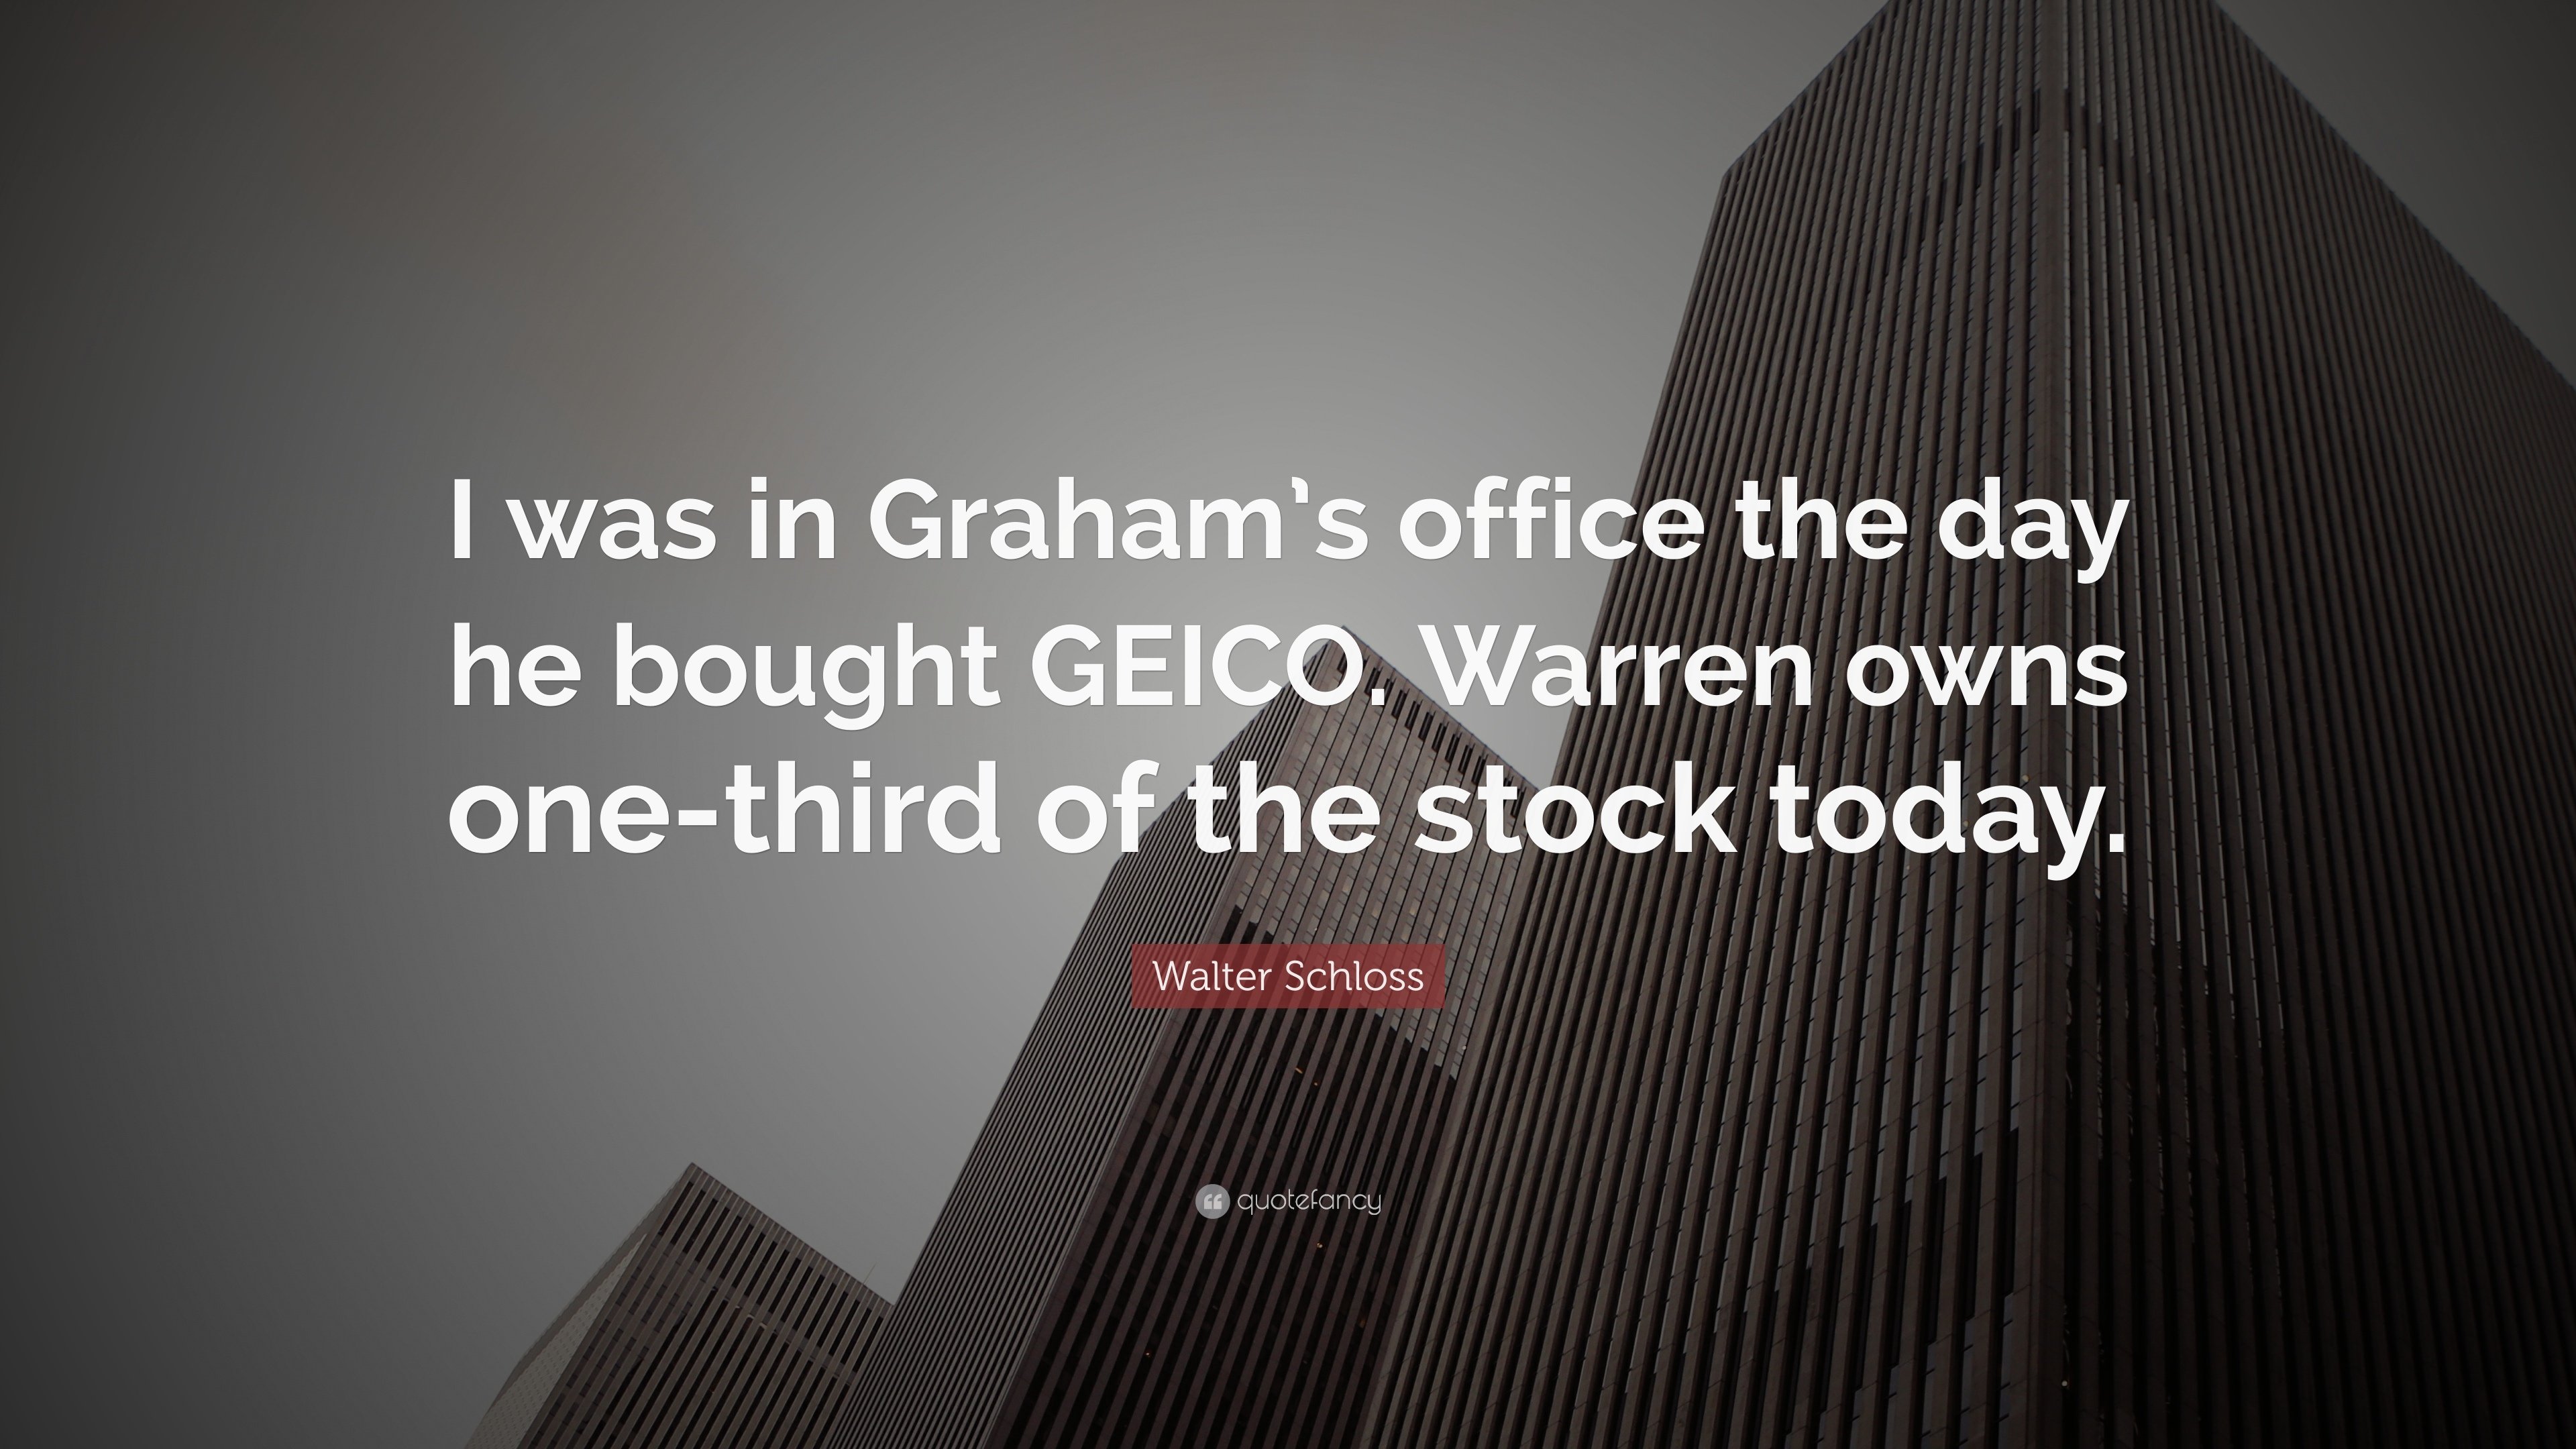 Walter Schloss Quote: “I was in Graham's office the day he bought